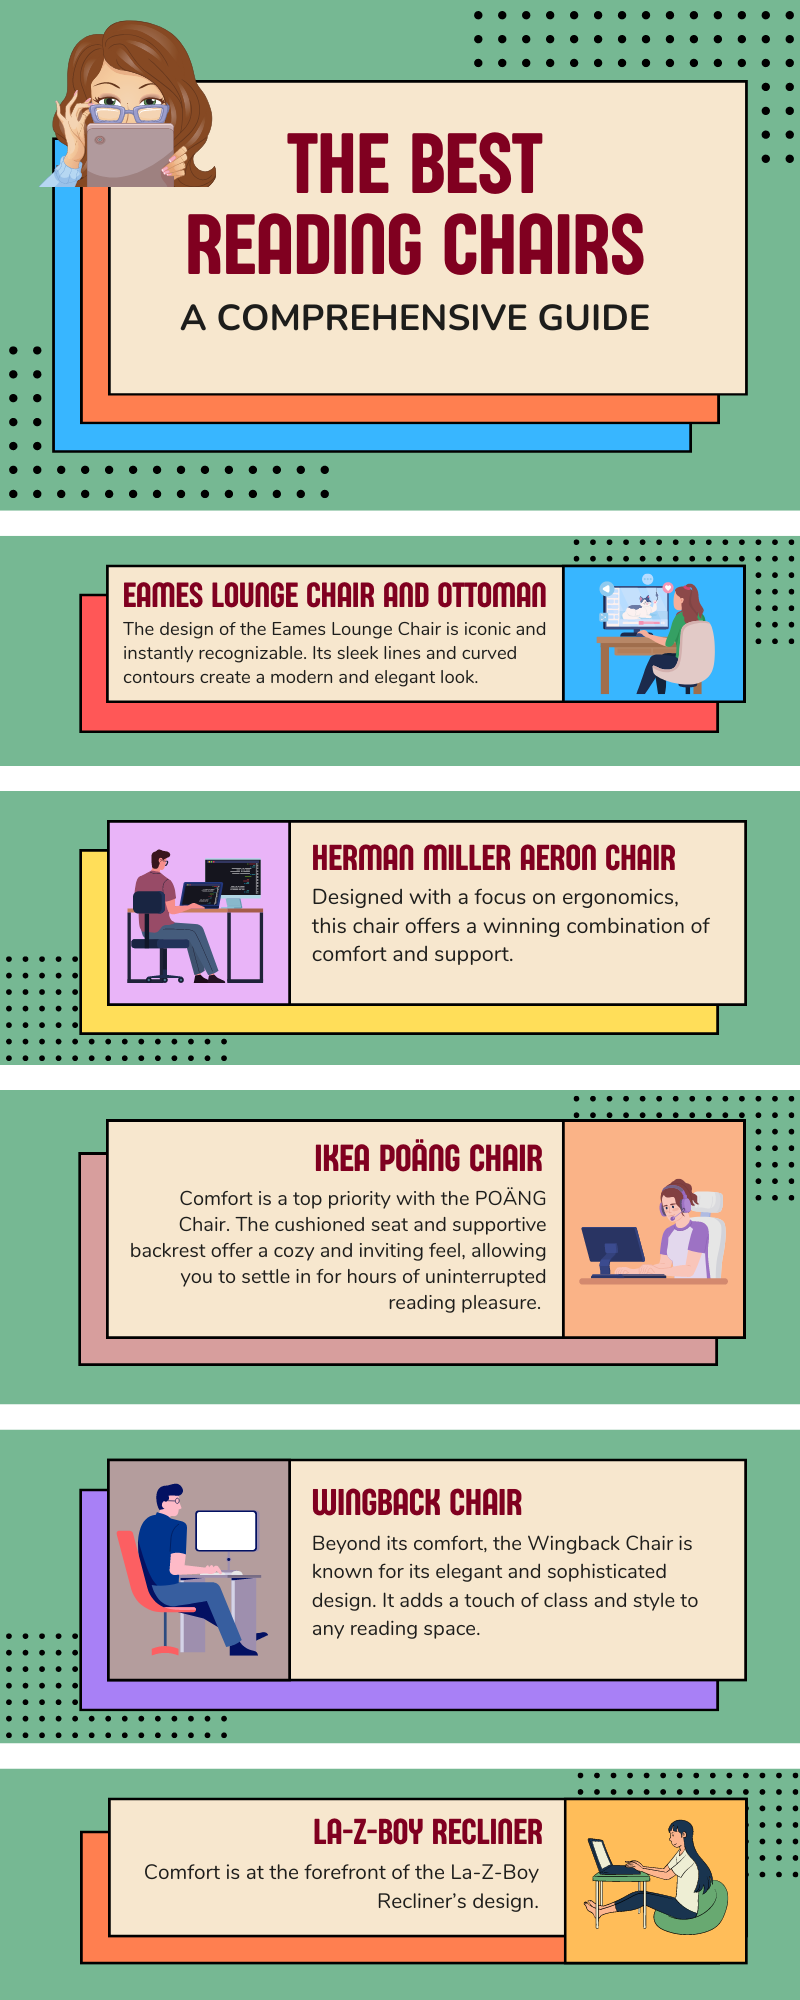 The Best Reading Chairs